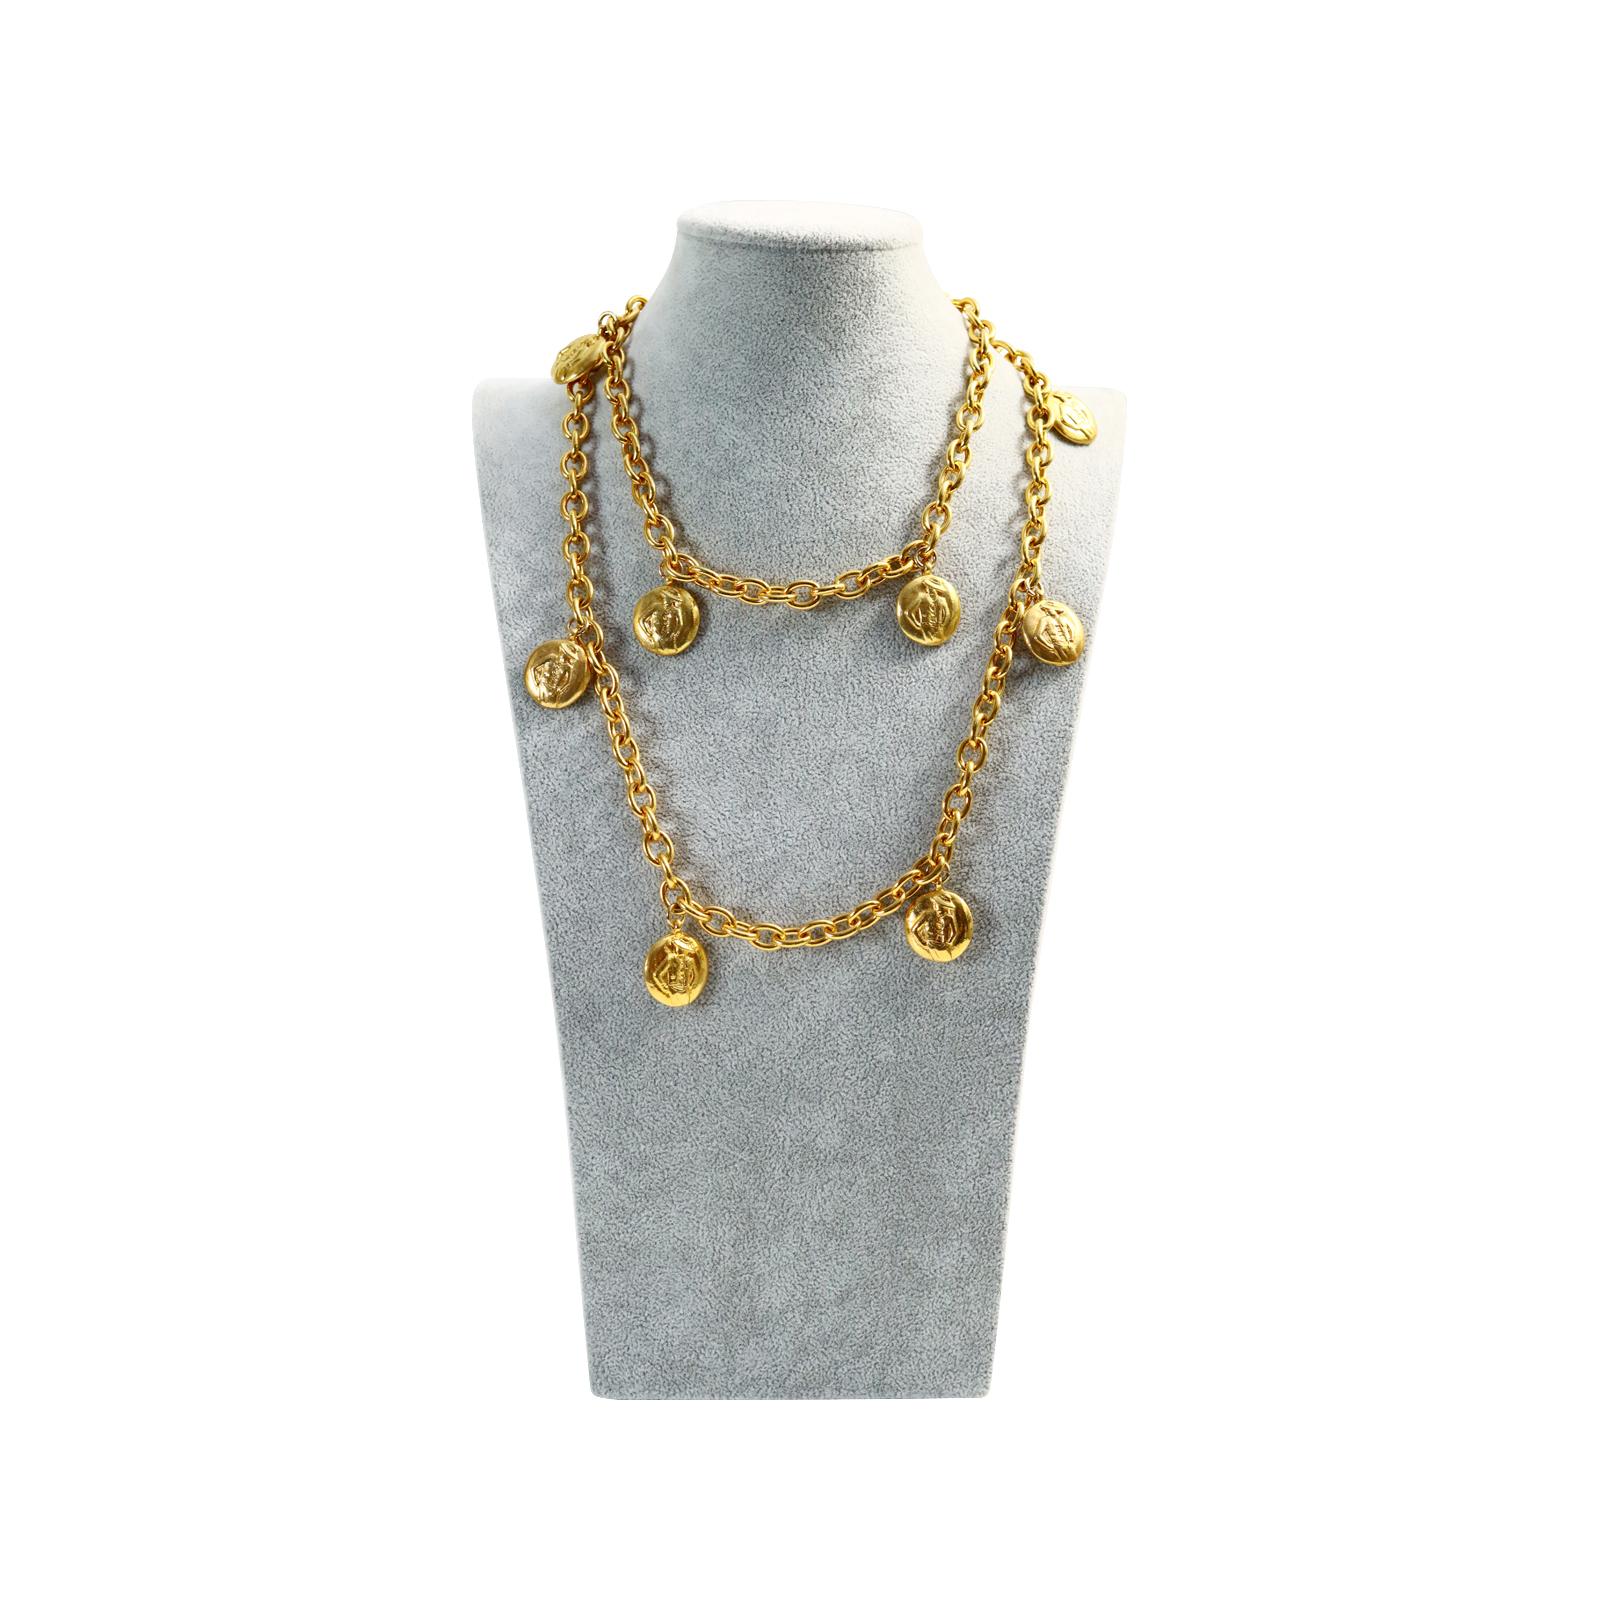 Vintage Chanel Gold Disc Chanel and Coco on Long Necklace Circa 1980s For Sale 7